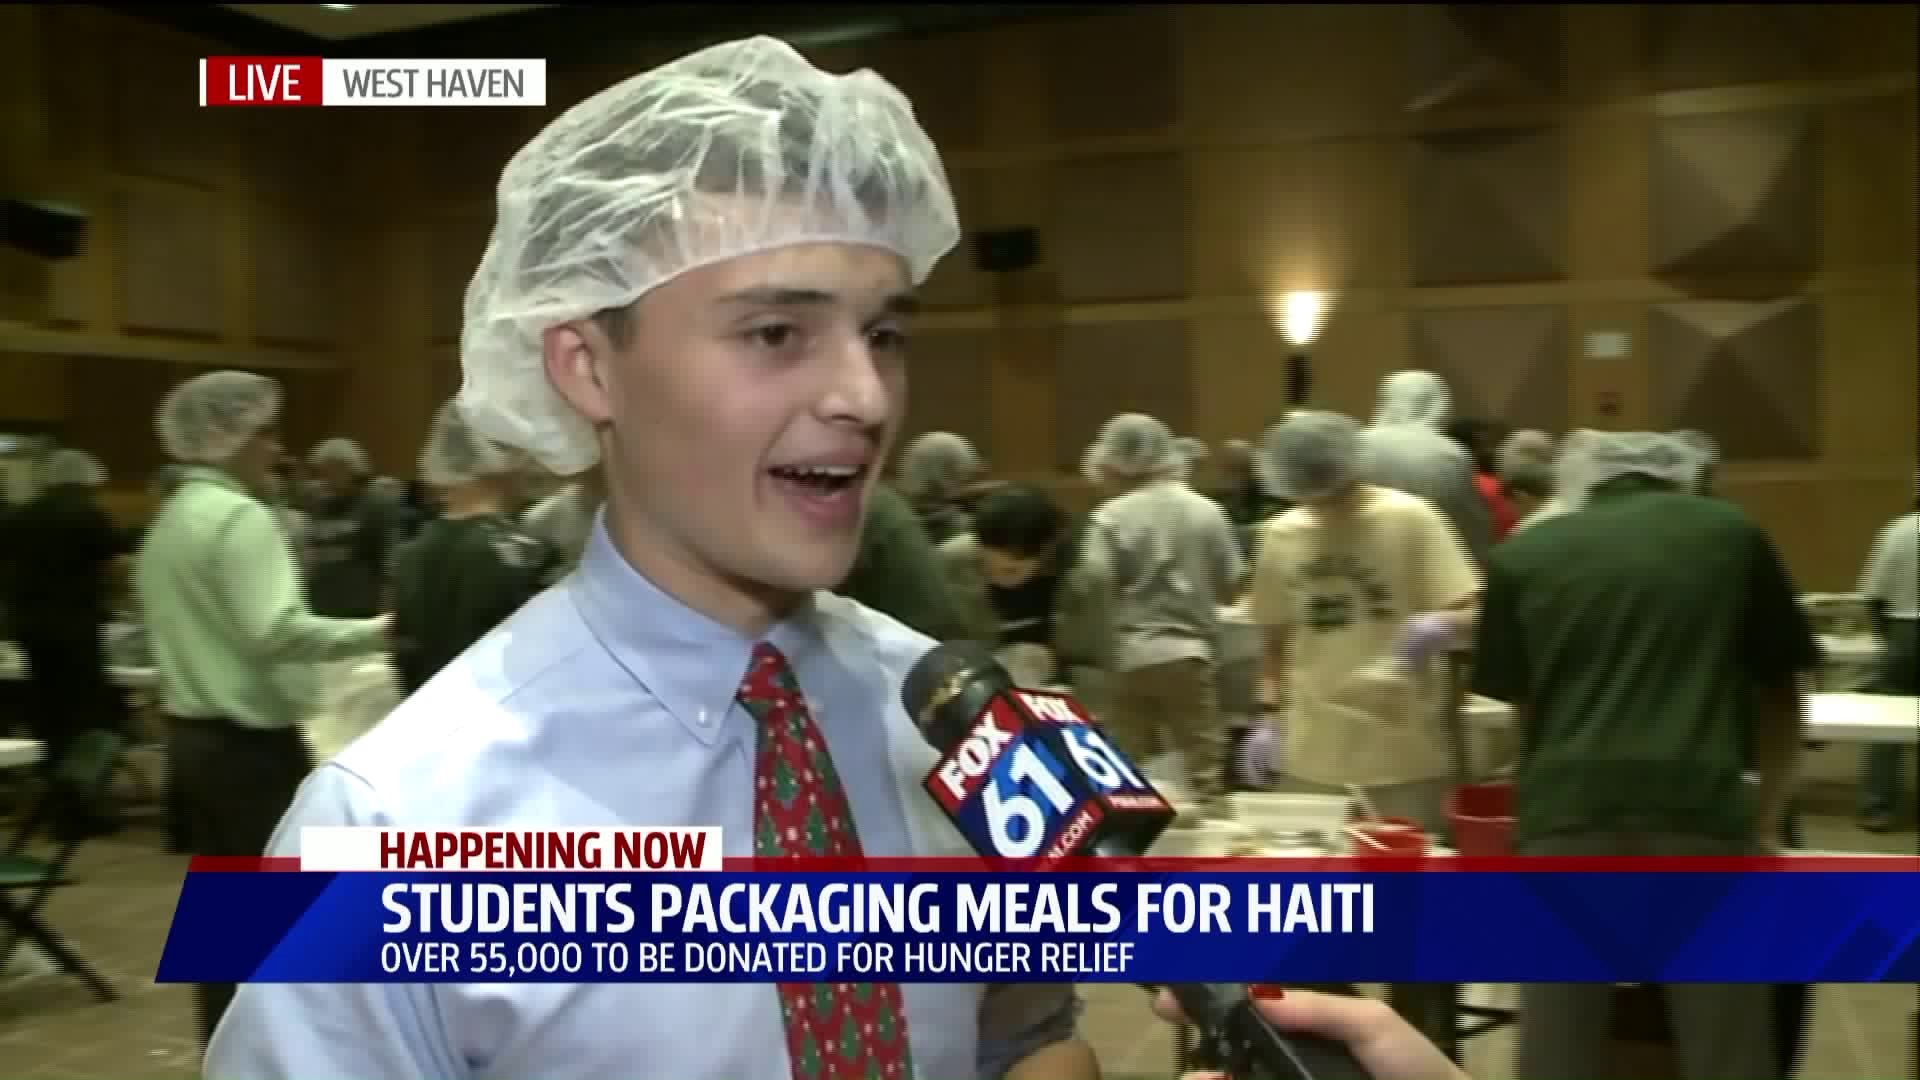 Meals for Haiti